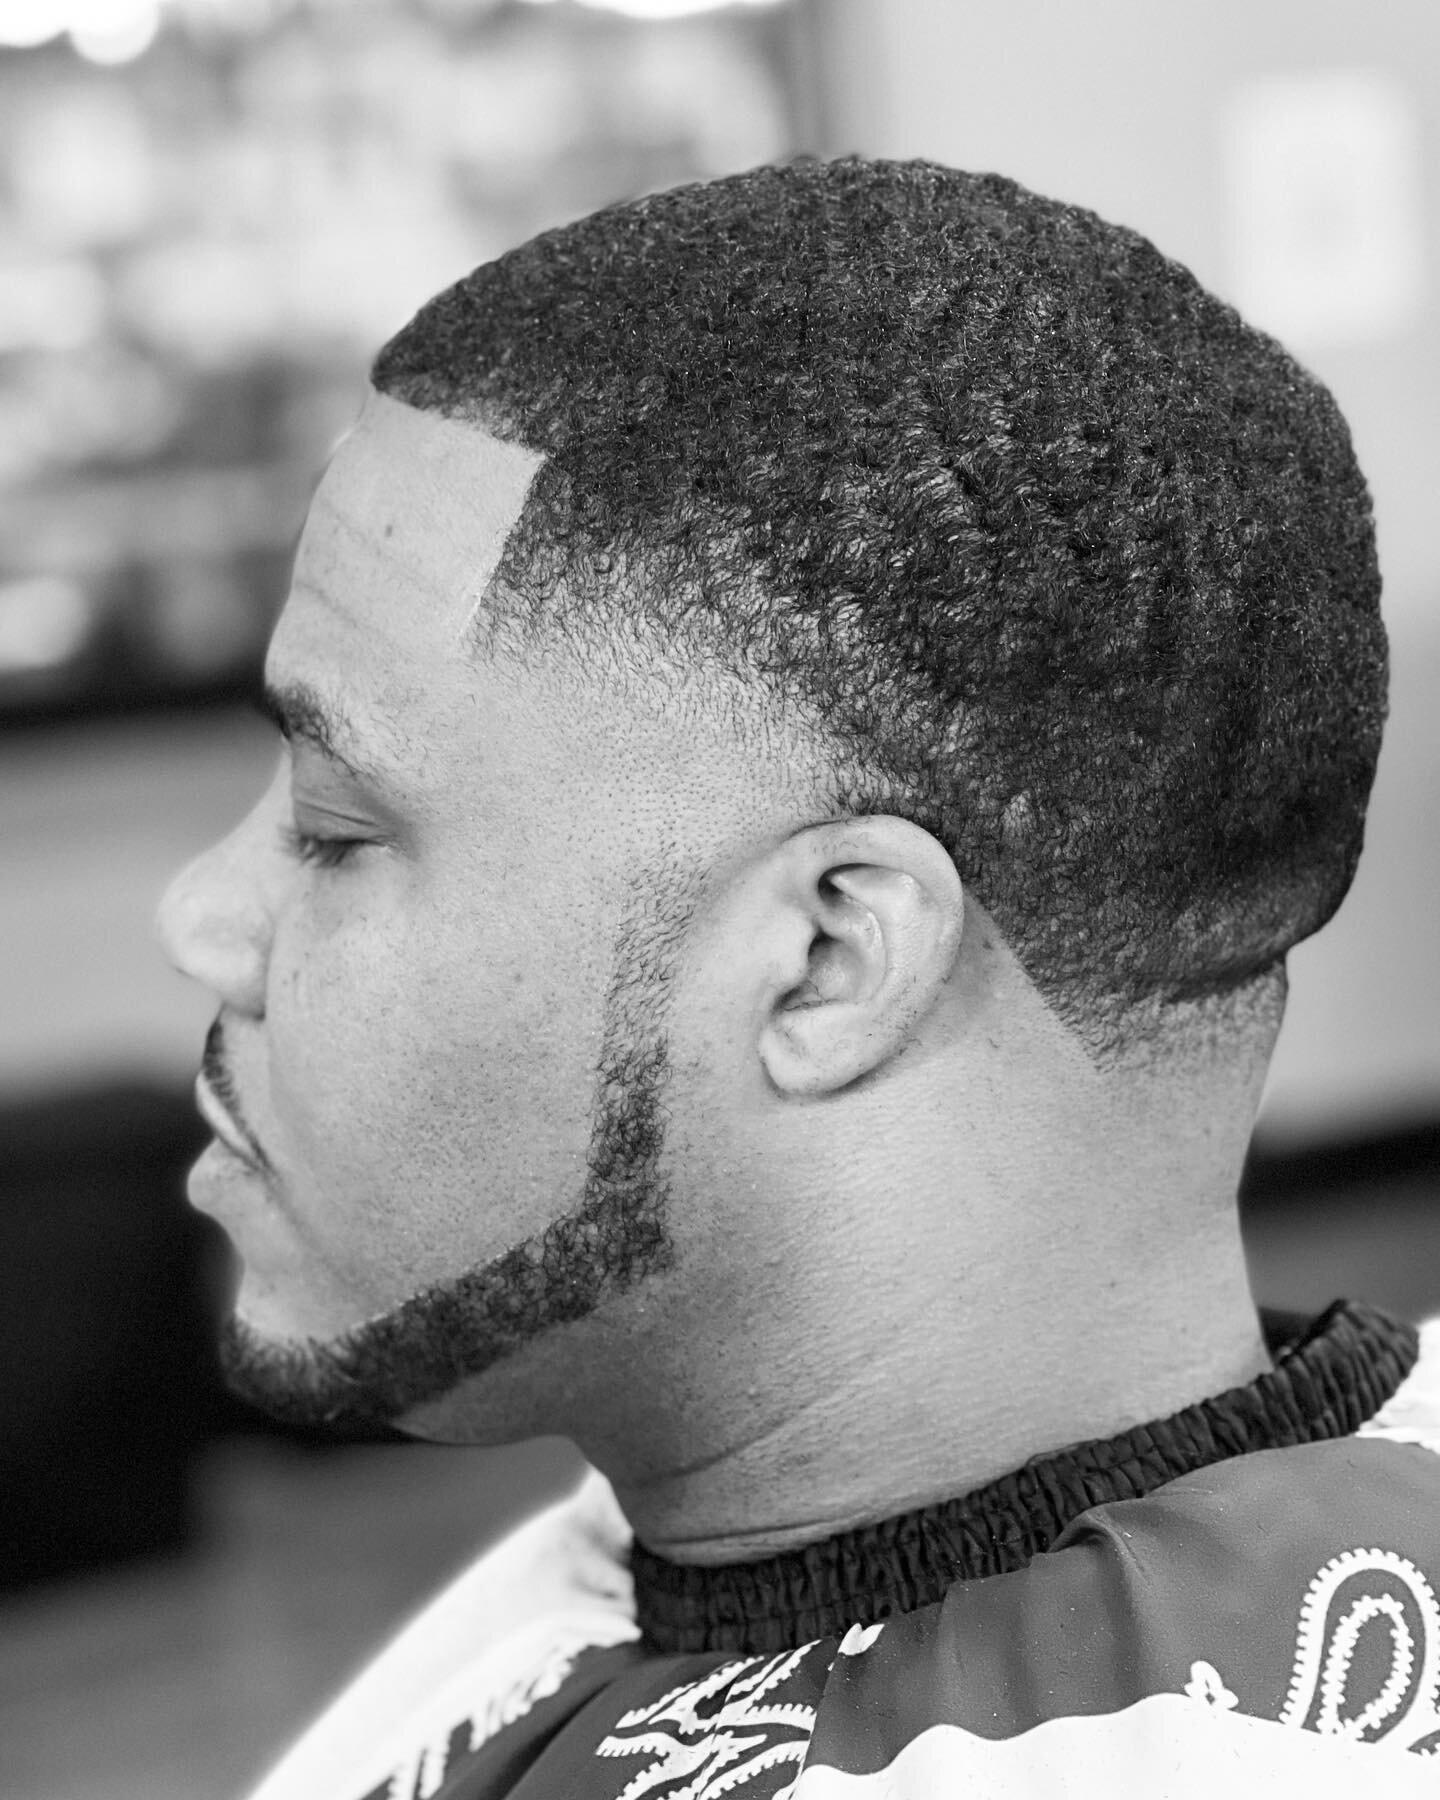 Attention to detail is what separates me from the next..
Redthebarbersj.com

#sanjose#dtsj#sanjosestate#barber#ybfb#yourbarbersfavoritebarber#fades#tapers#lineup#beard#chinstrap#mcblender#barbershopconnect